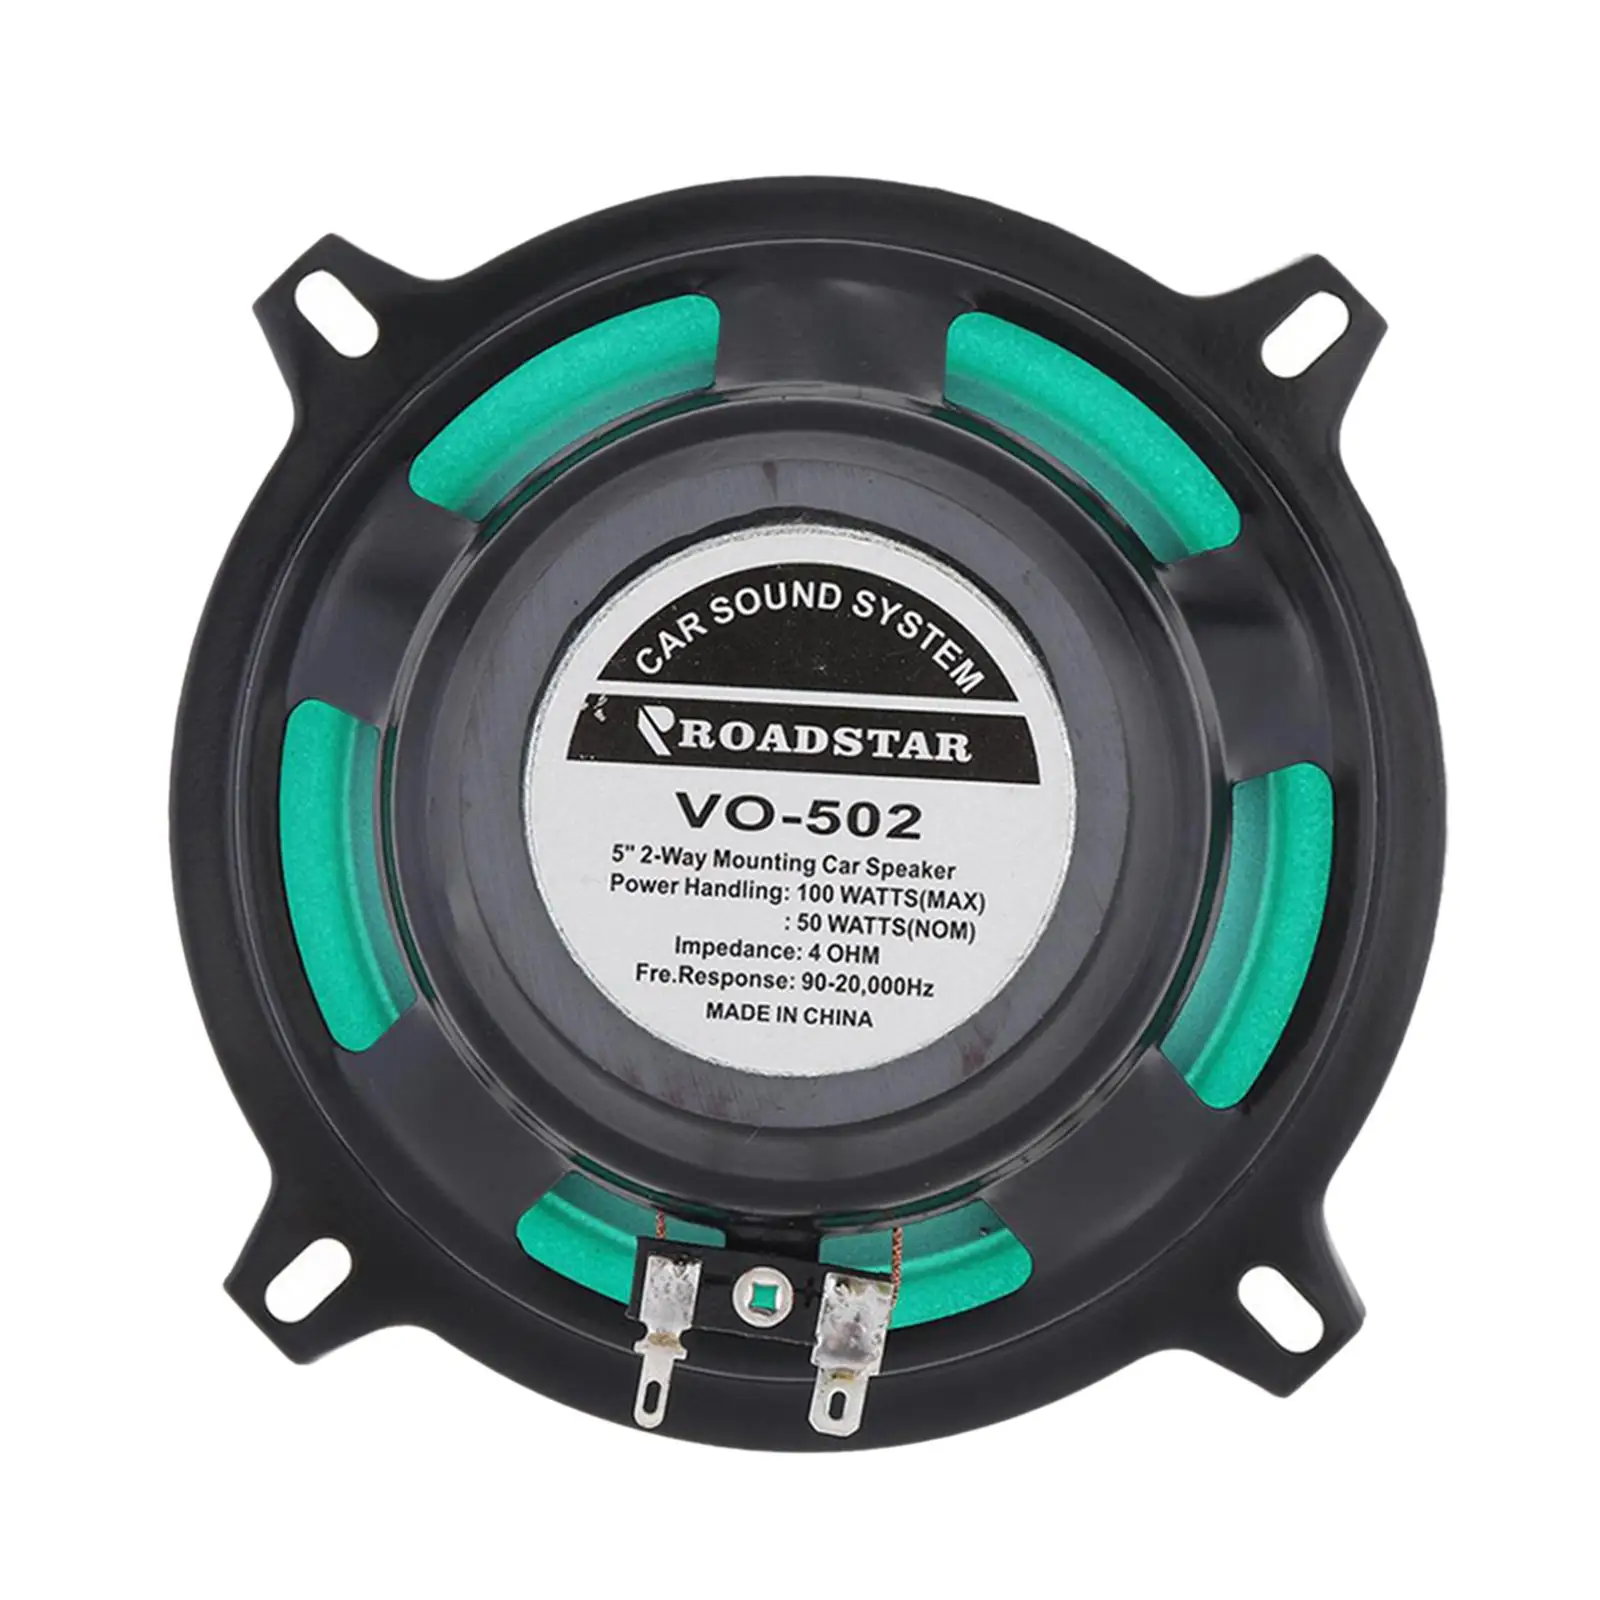 4 inch Coaxial Speaker Universal Durable Easy Install VO-402 Stereo 100W Car Speaker Car Loudspeaker for Automobile